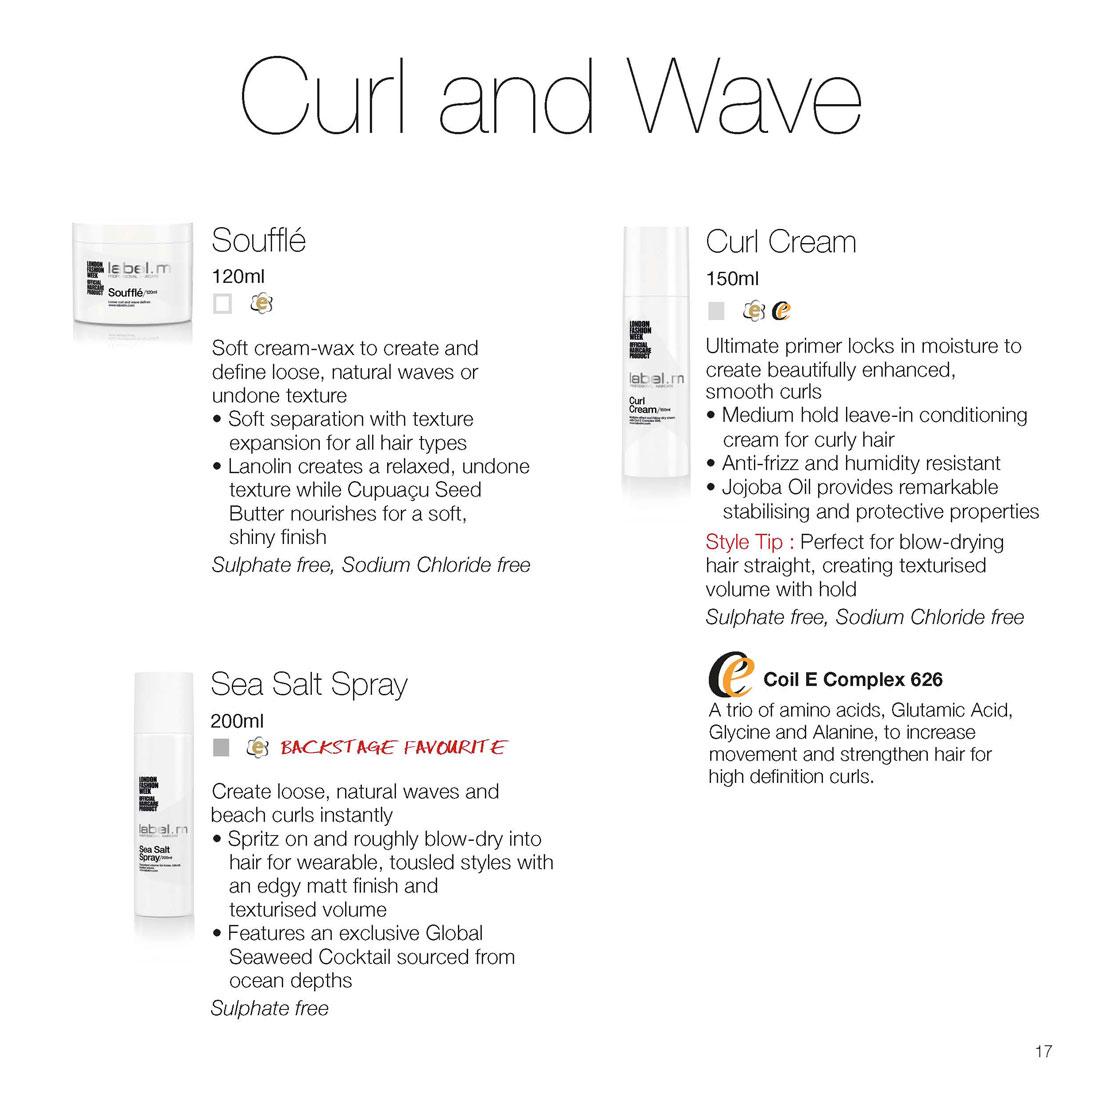 587.9-label-m-curl-and-wave-pg-17.jpg